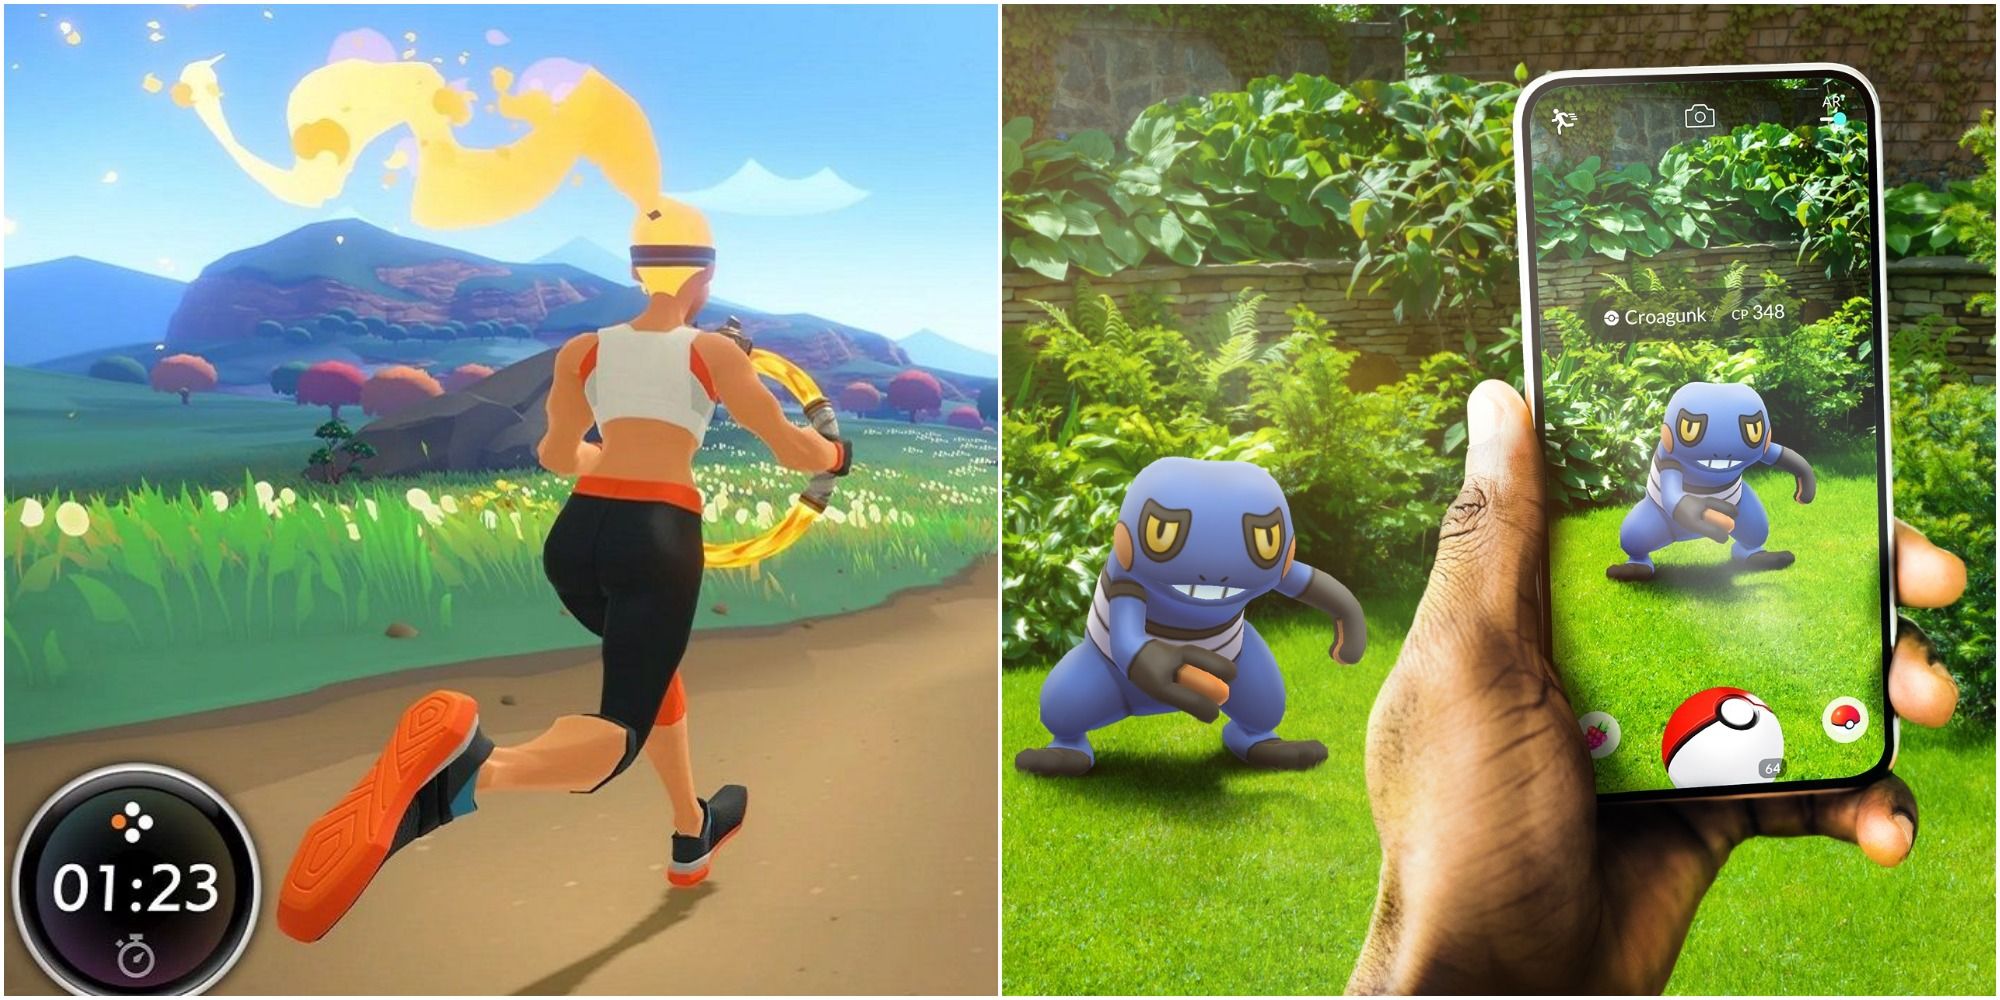 Ring Fit Adventure Main Character Running & Pokemon Go Mobile Phone Augmented Reality Comparison